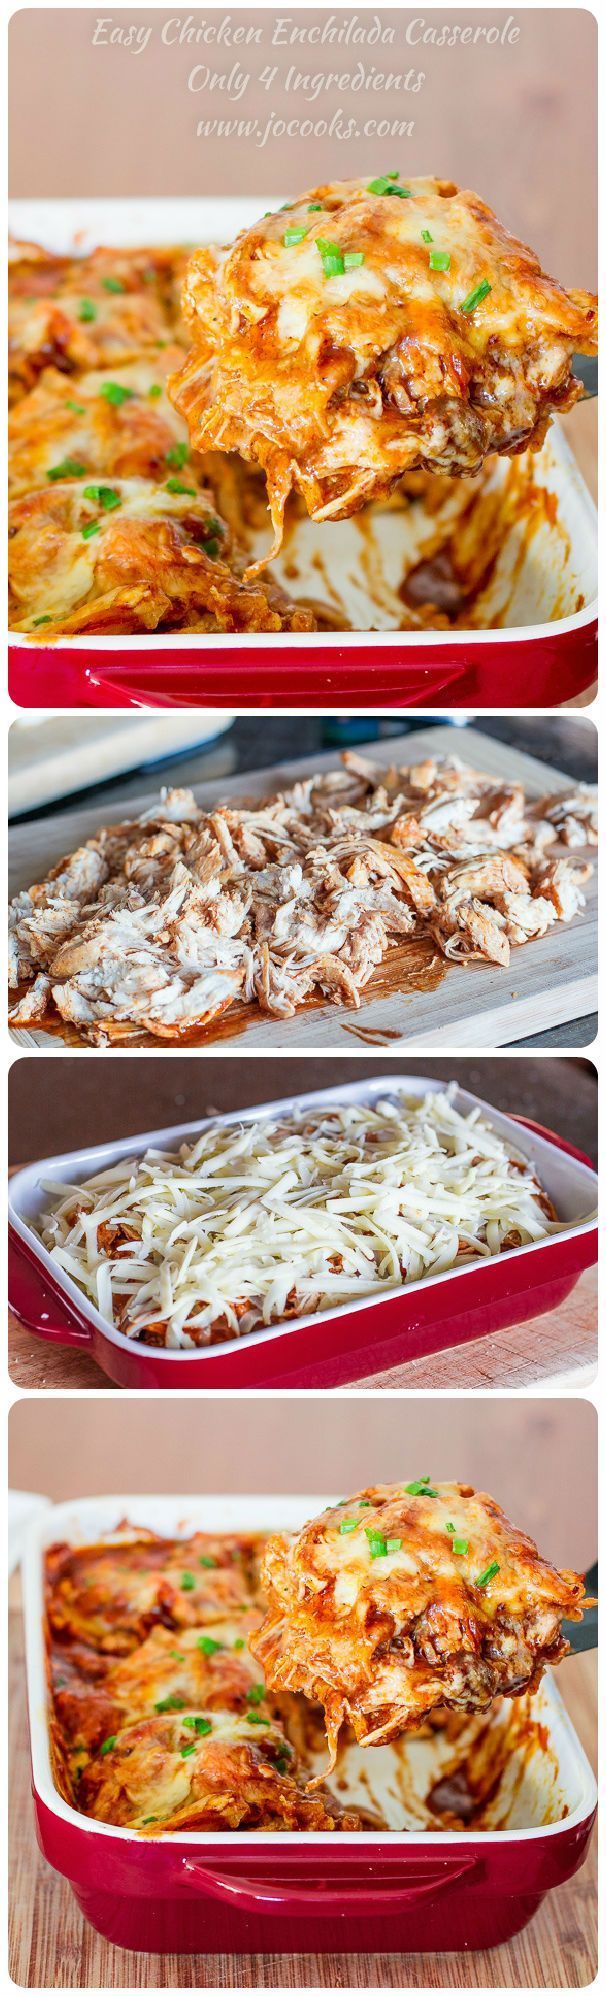 Easy Chicken Enchilada Casserole  4 ingredients is all it takes to make this popular Mexican dish. Its cheesy, its spicy, its